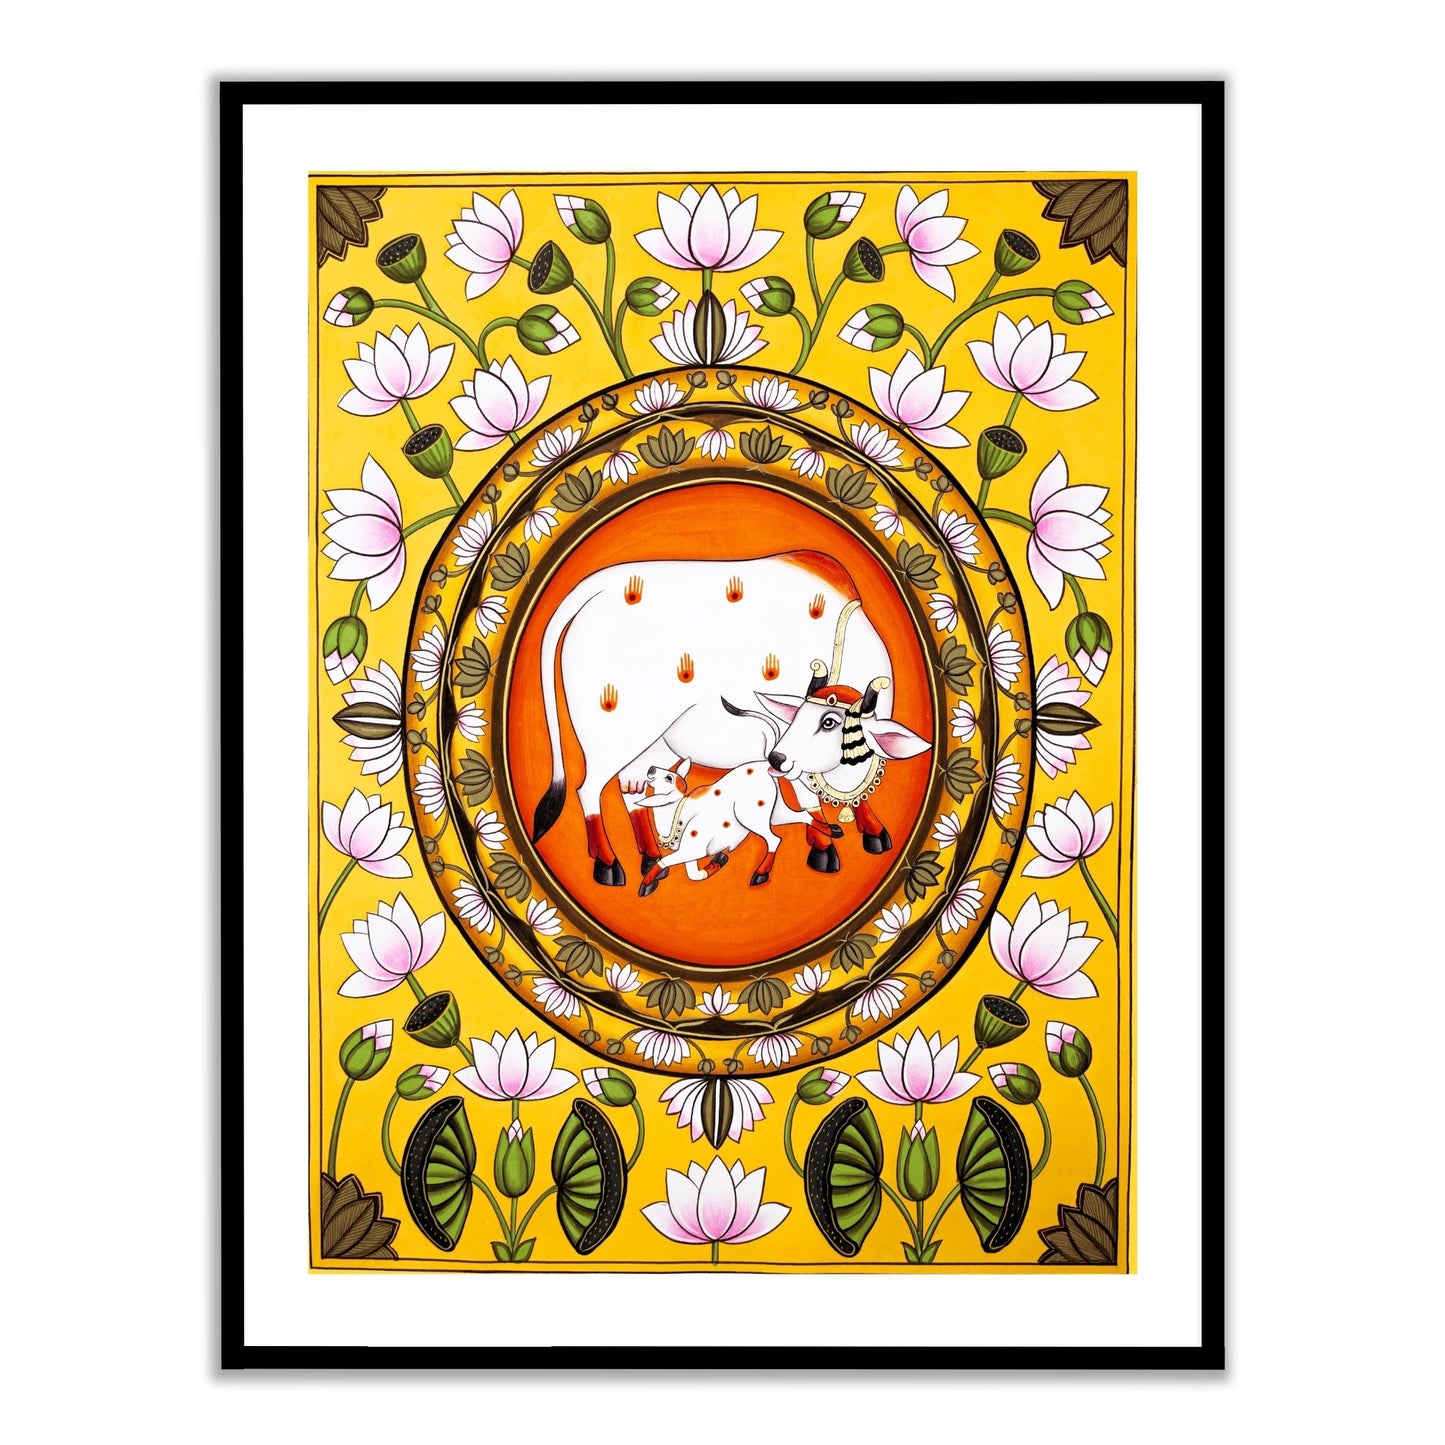 Lotus Pichwai Cow Painting | Indian Art for Home decor Wall Painting